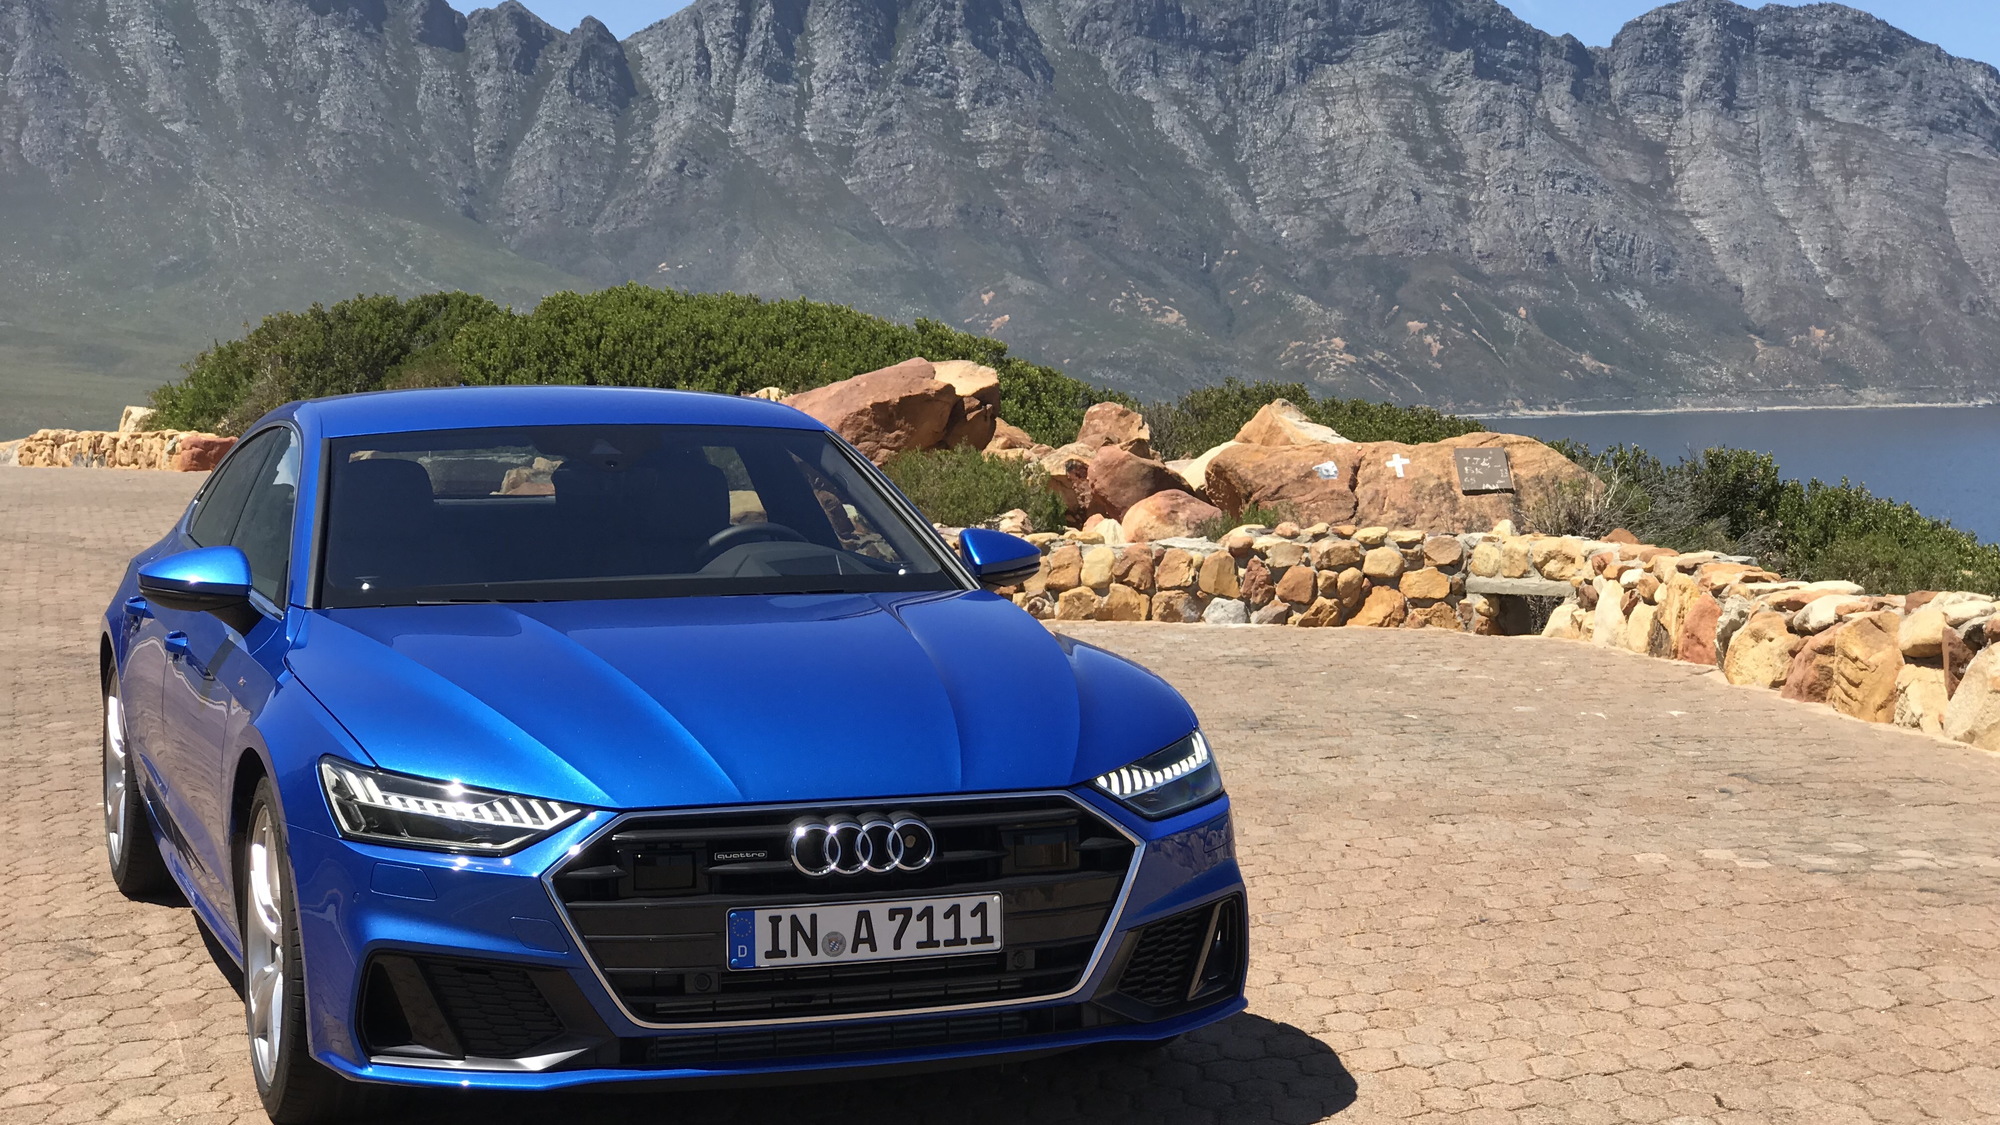 2019 Audi A7, January, 2018 media drive, Cape Town, South Africa